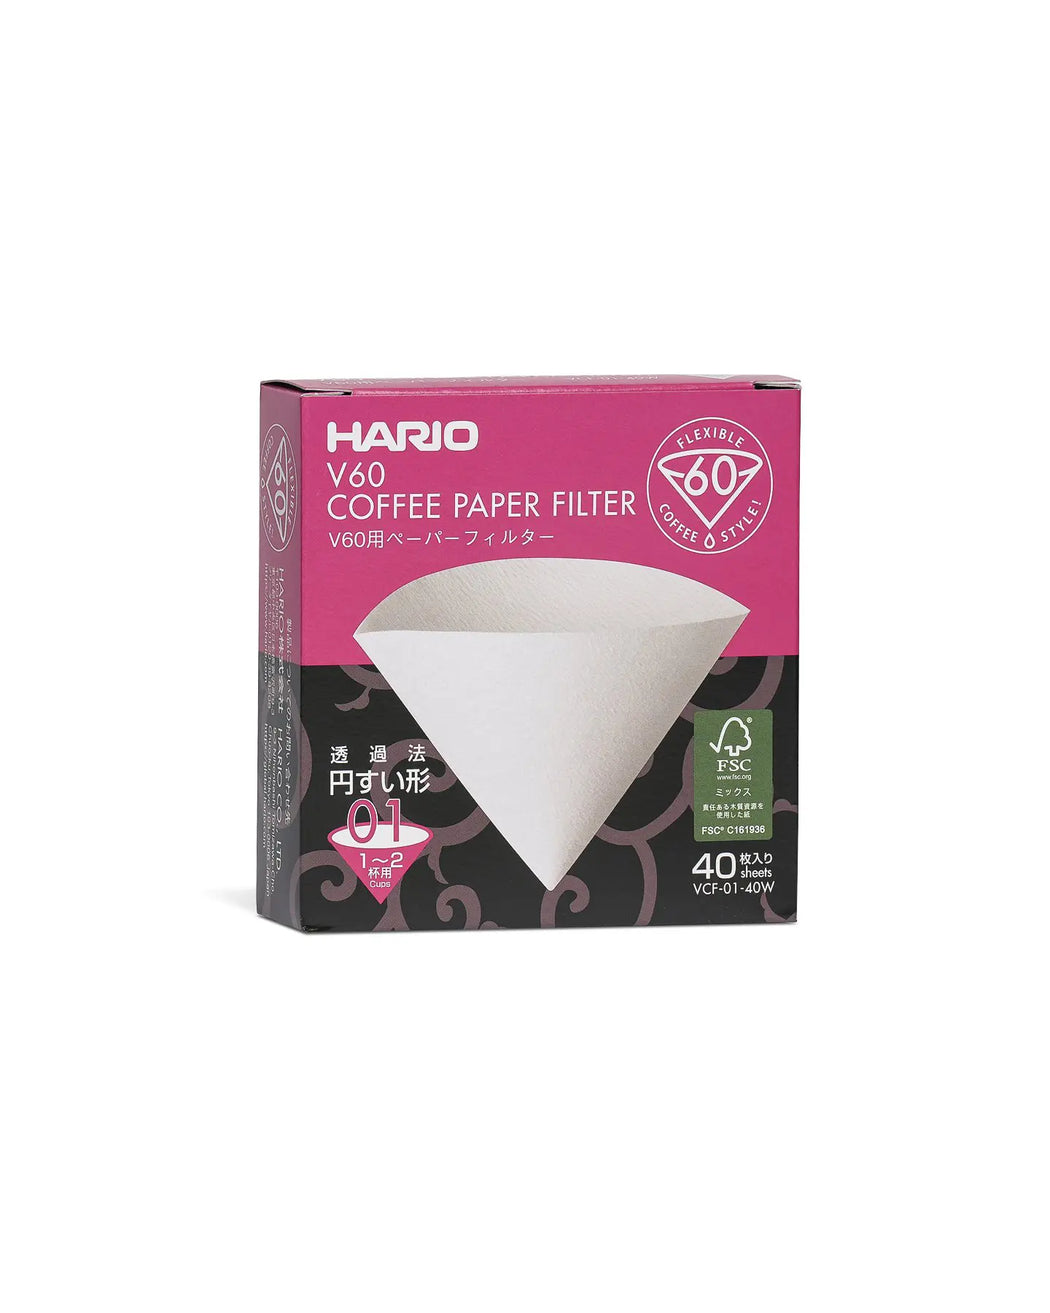 Hario V60 Paper filters. They come in different sizes.